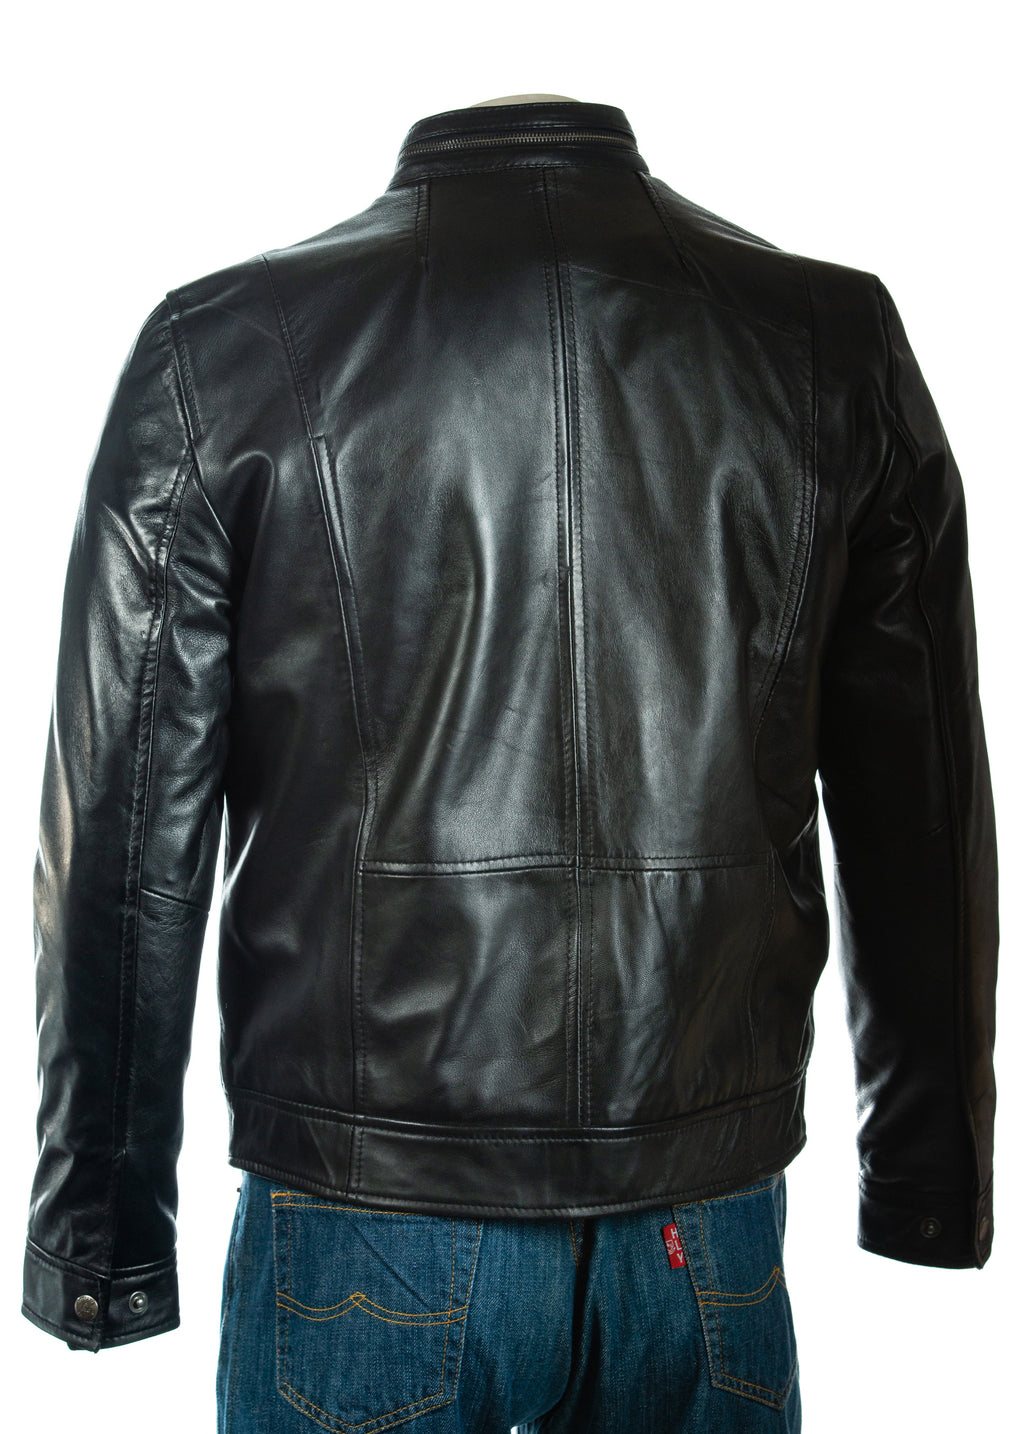 Men's Black Classic Pocketed Leather Jacket: Renato